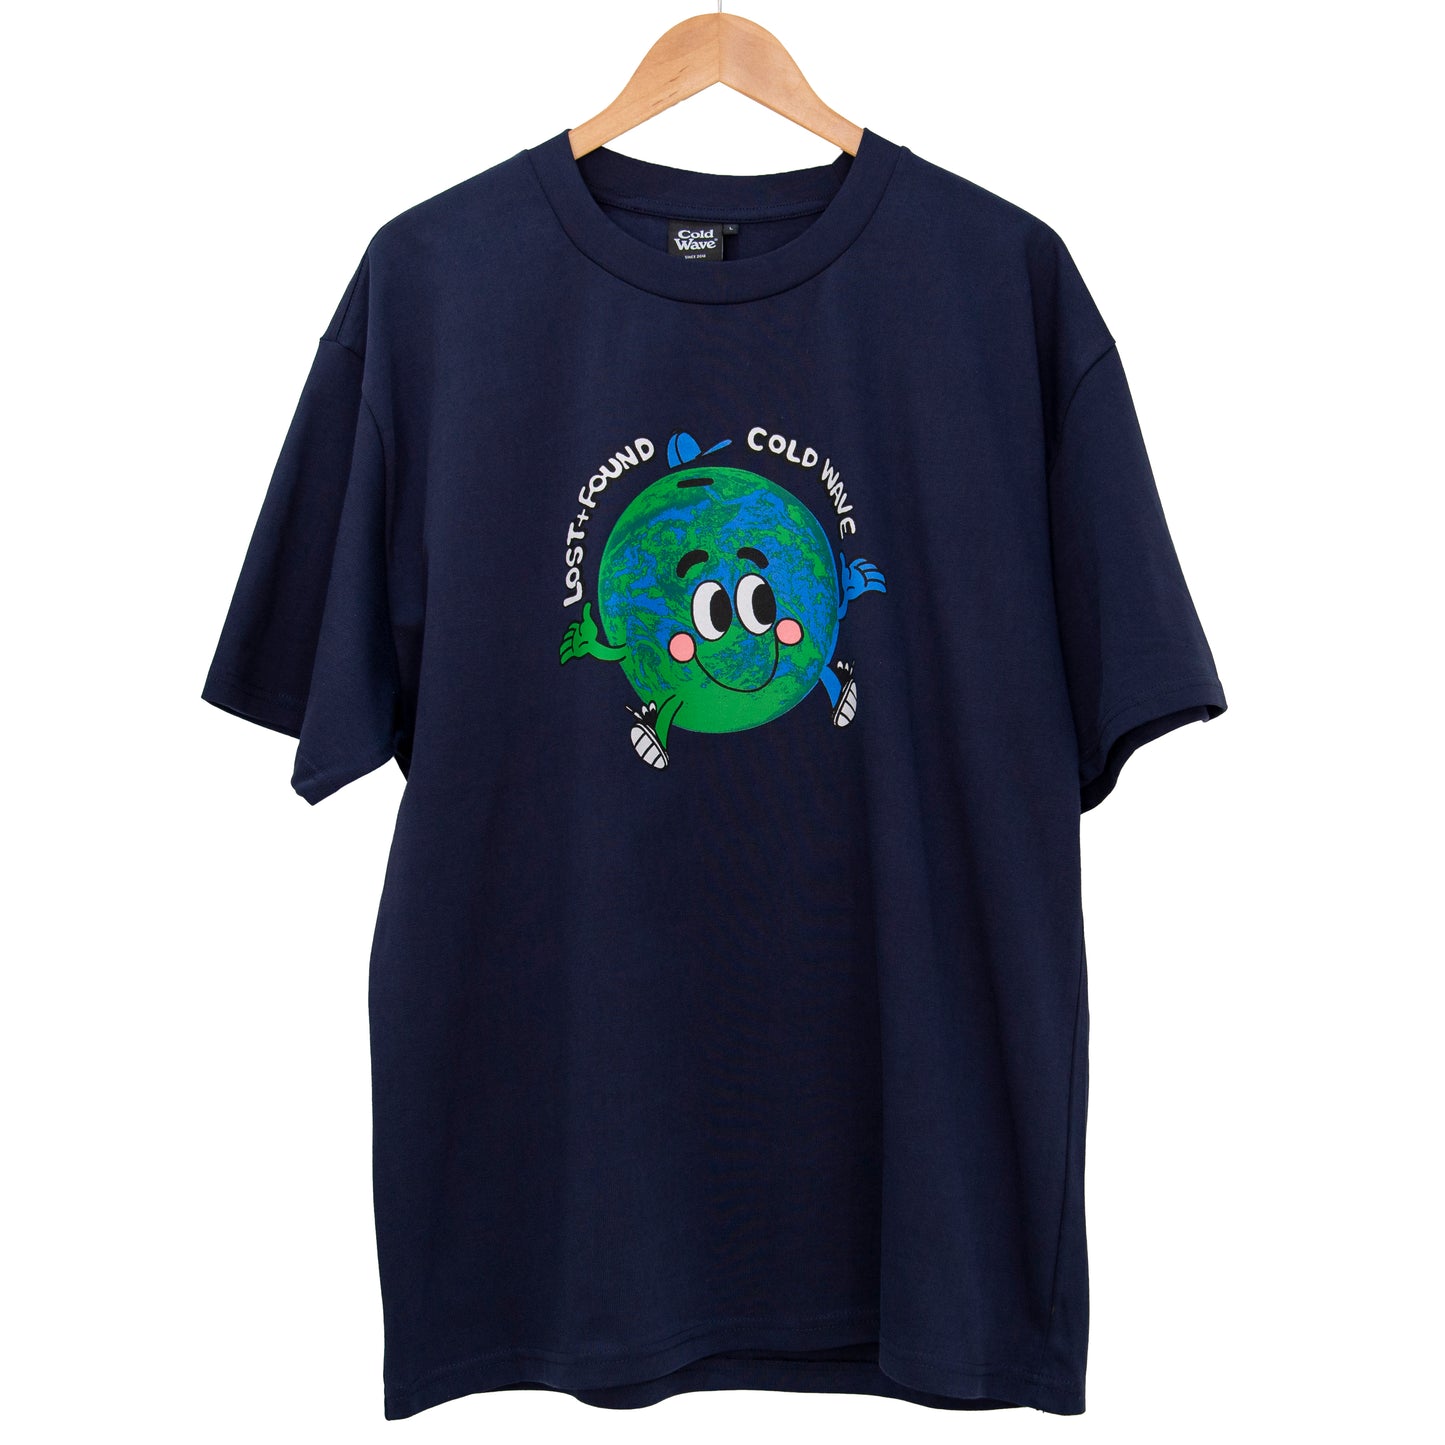 Cold Wave x Lost & Found 'Globe' T-Shirt Navy Blue